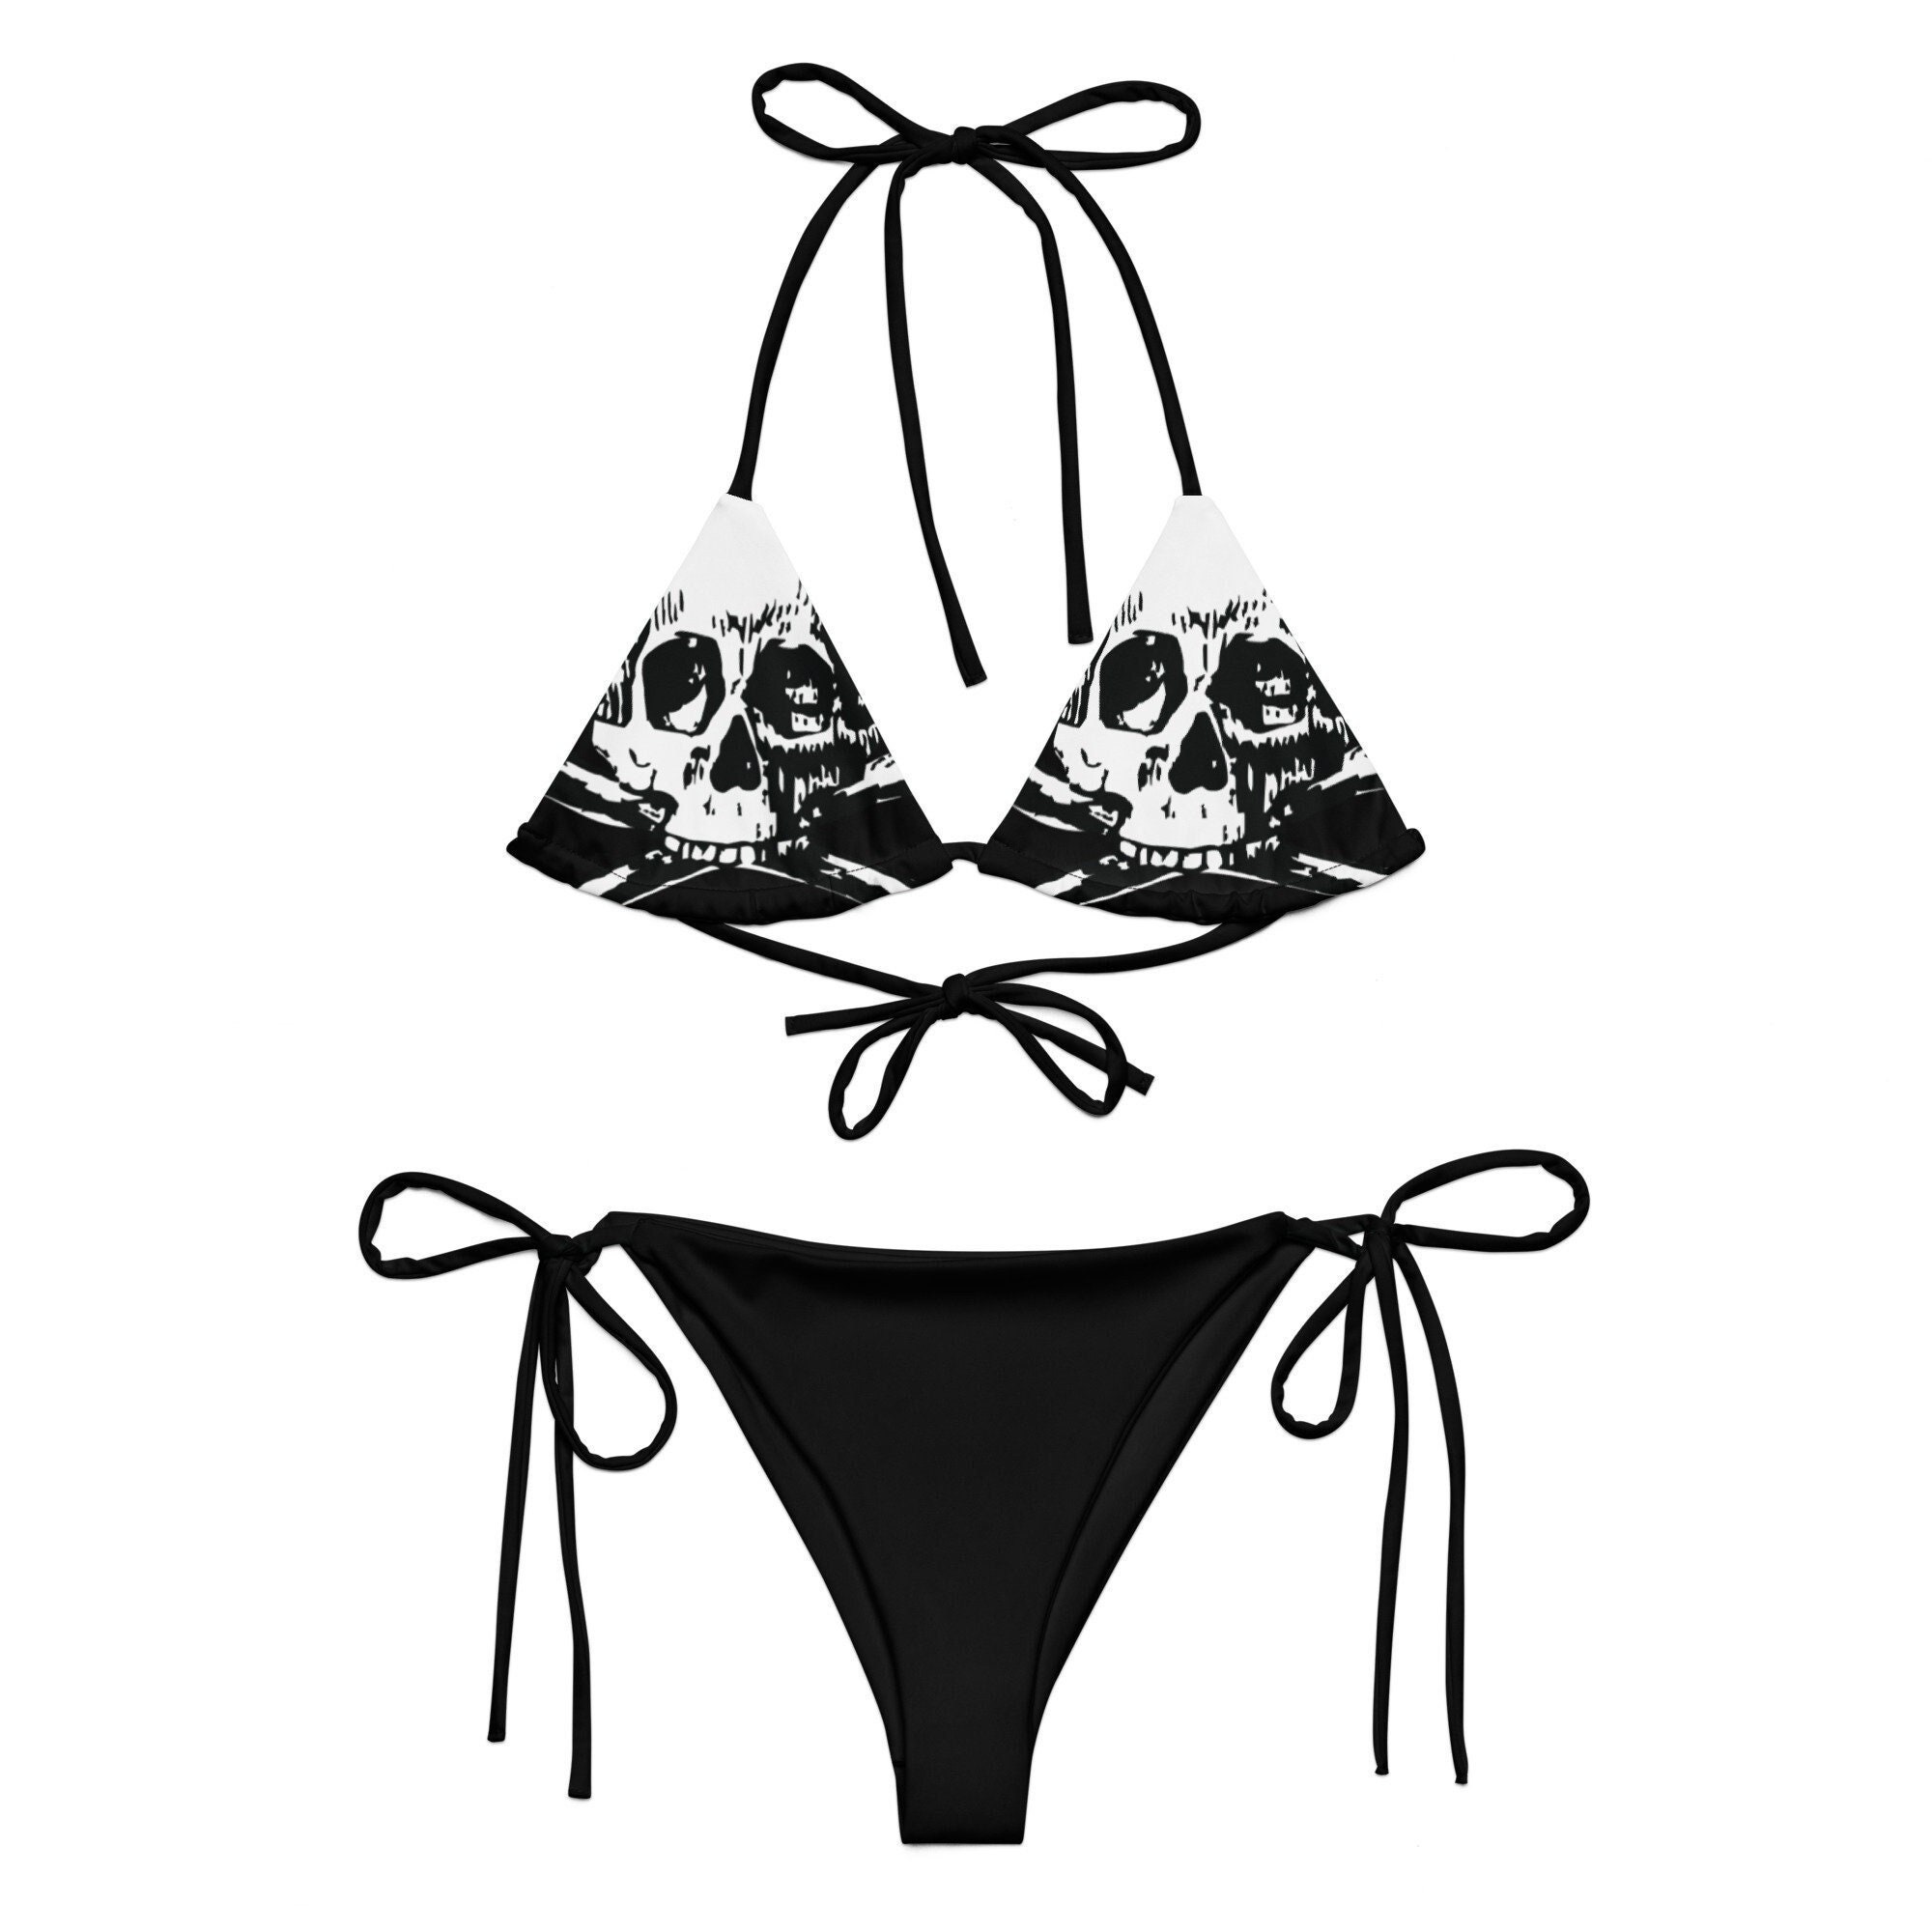 Black Metal Thick 1 Hook Set For Bathing Suit Swimsuit & Other